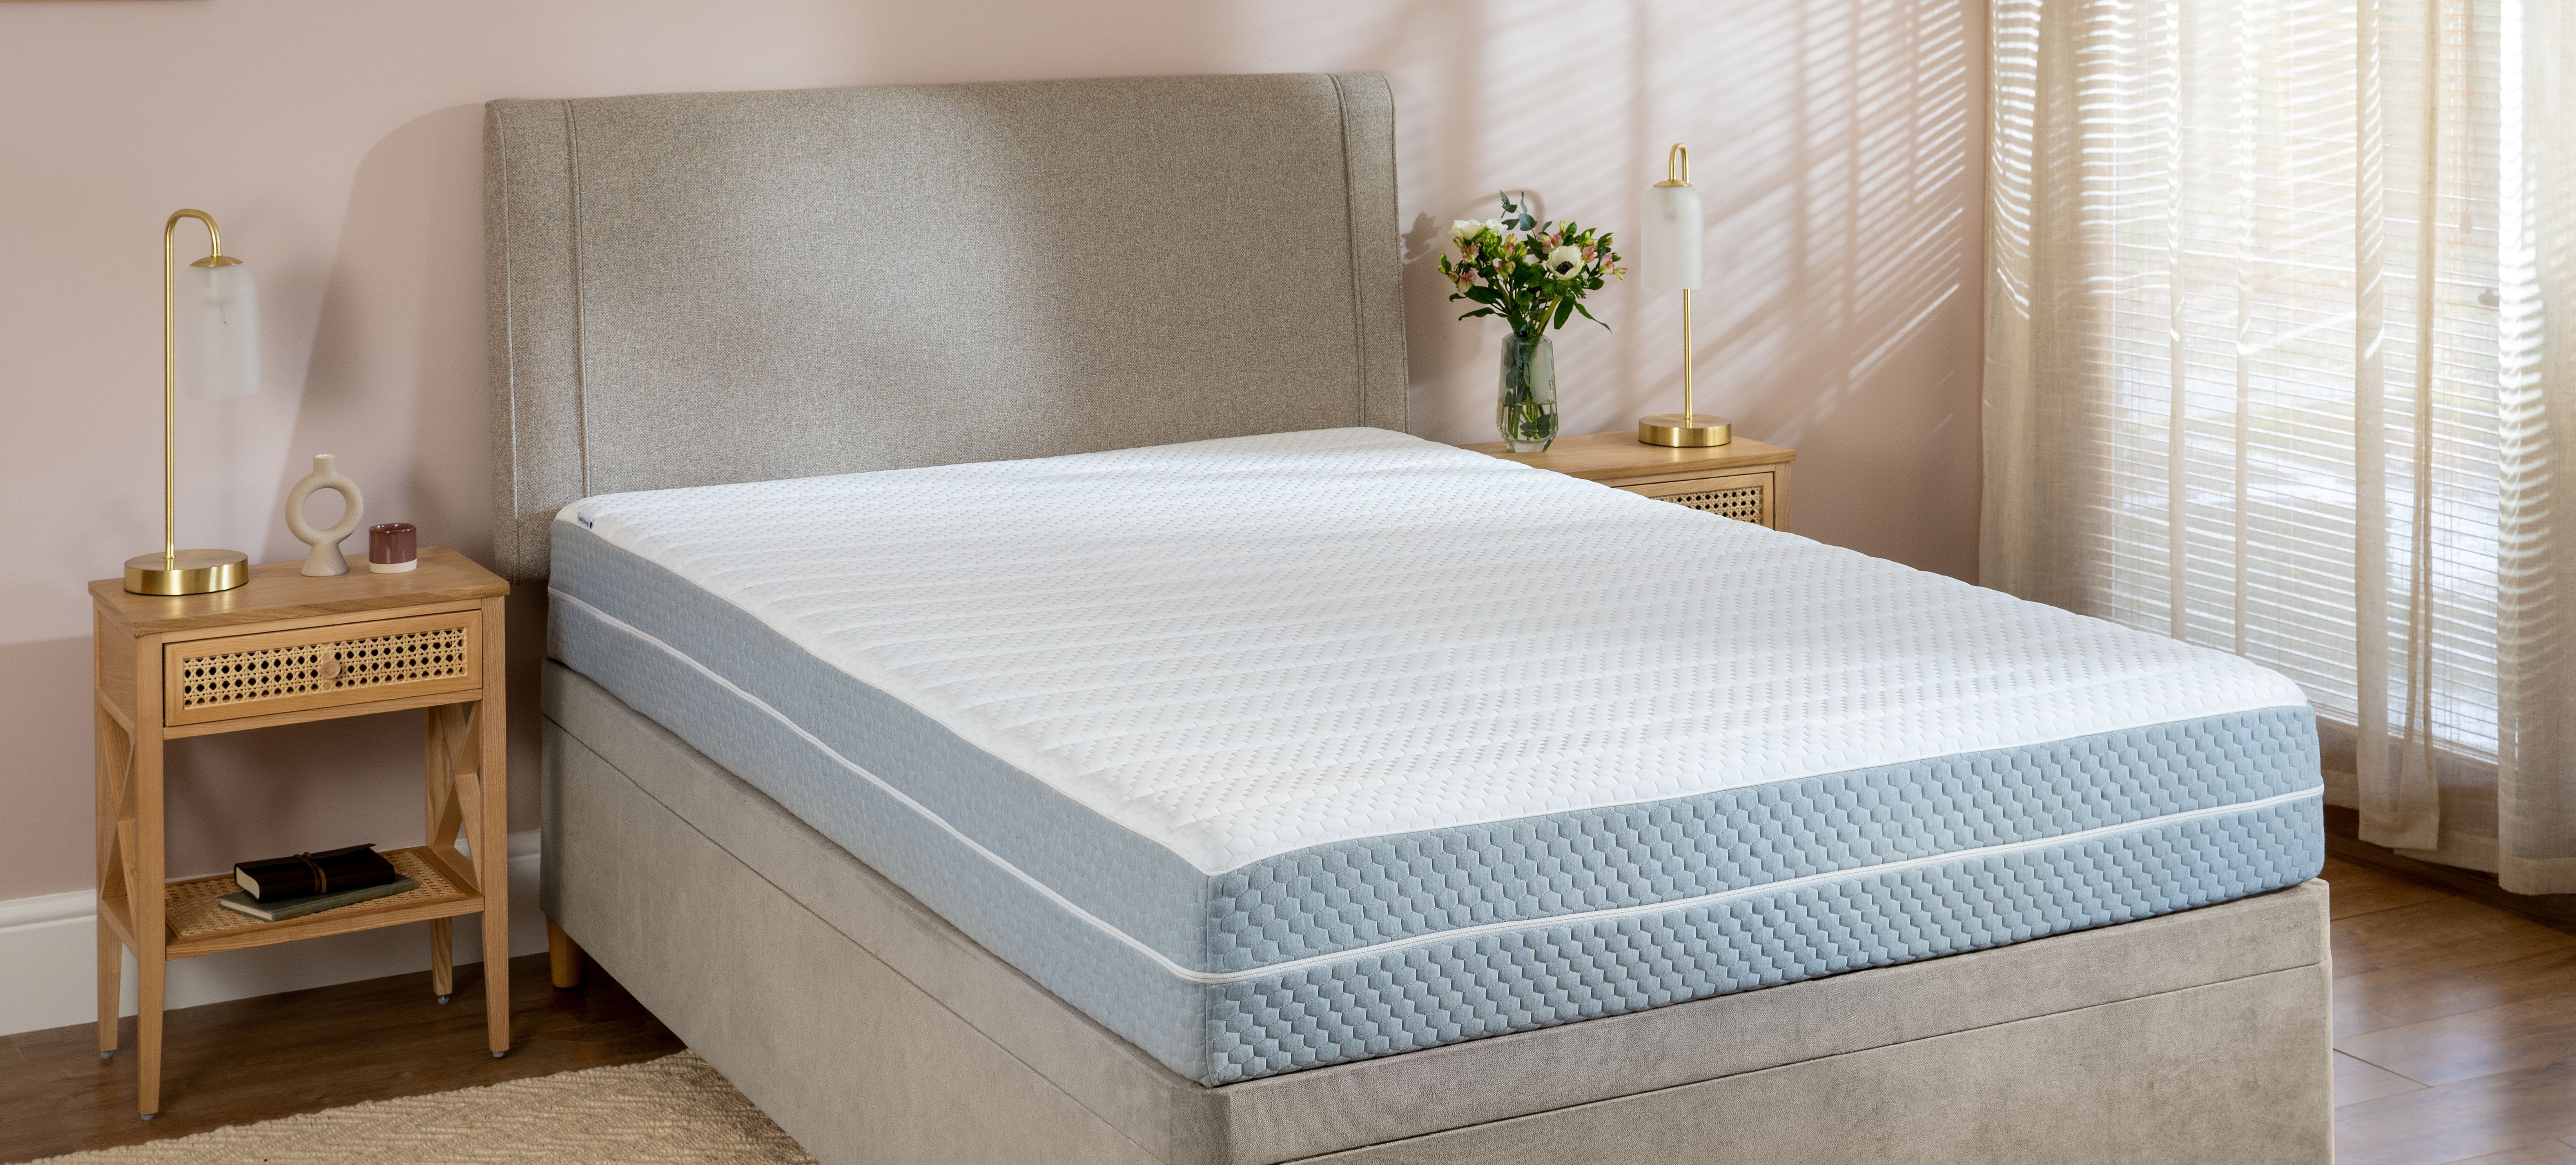 Soak&Sleep Memory Foam Mattress - styled in a bright, fresh bedroom with sunlight beaming through the blinds.